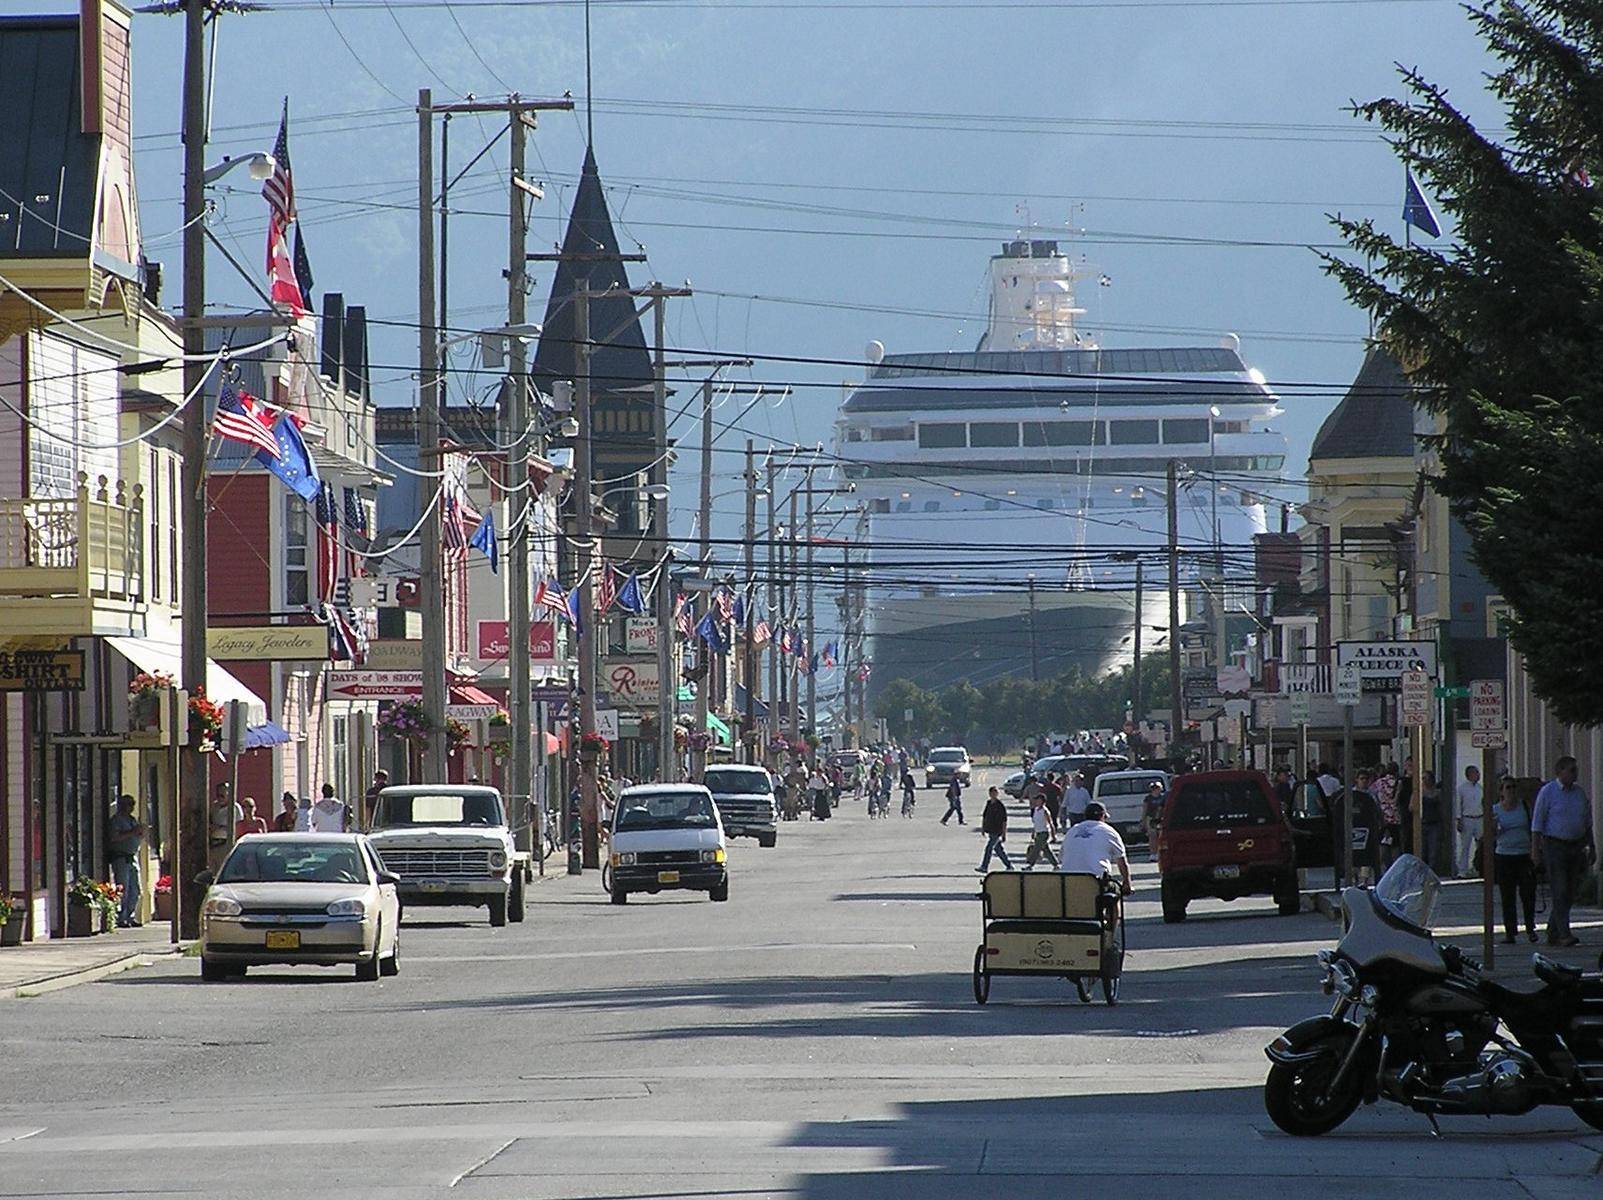 busy street in skagway, huge ship in the back, western style houses